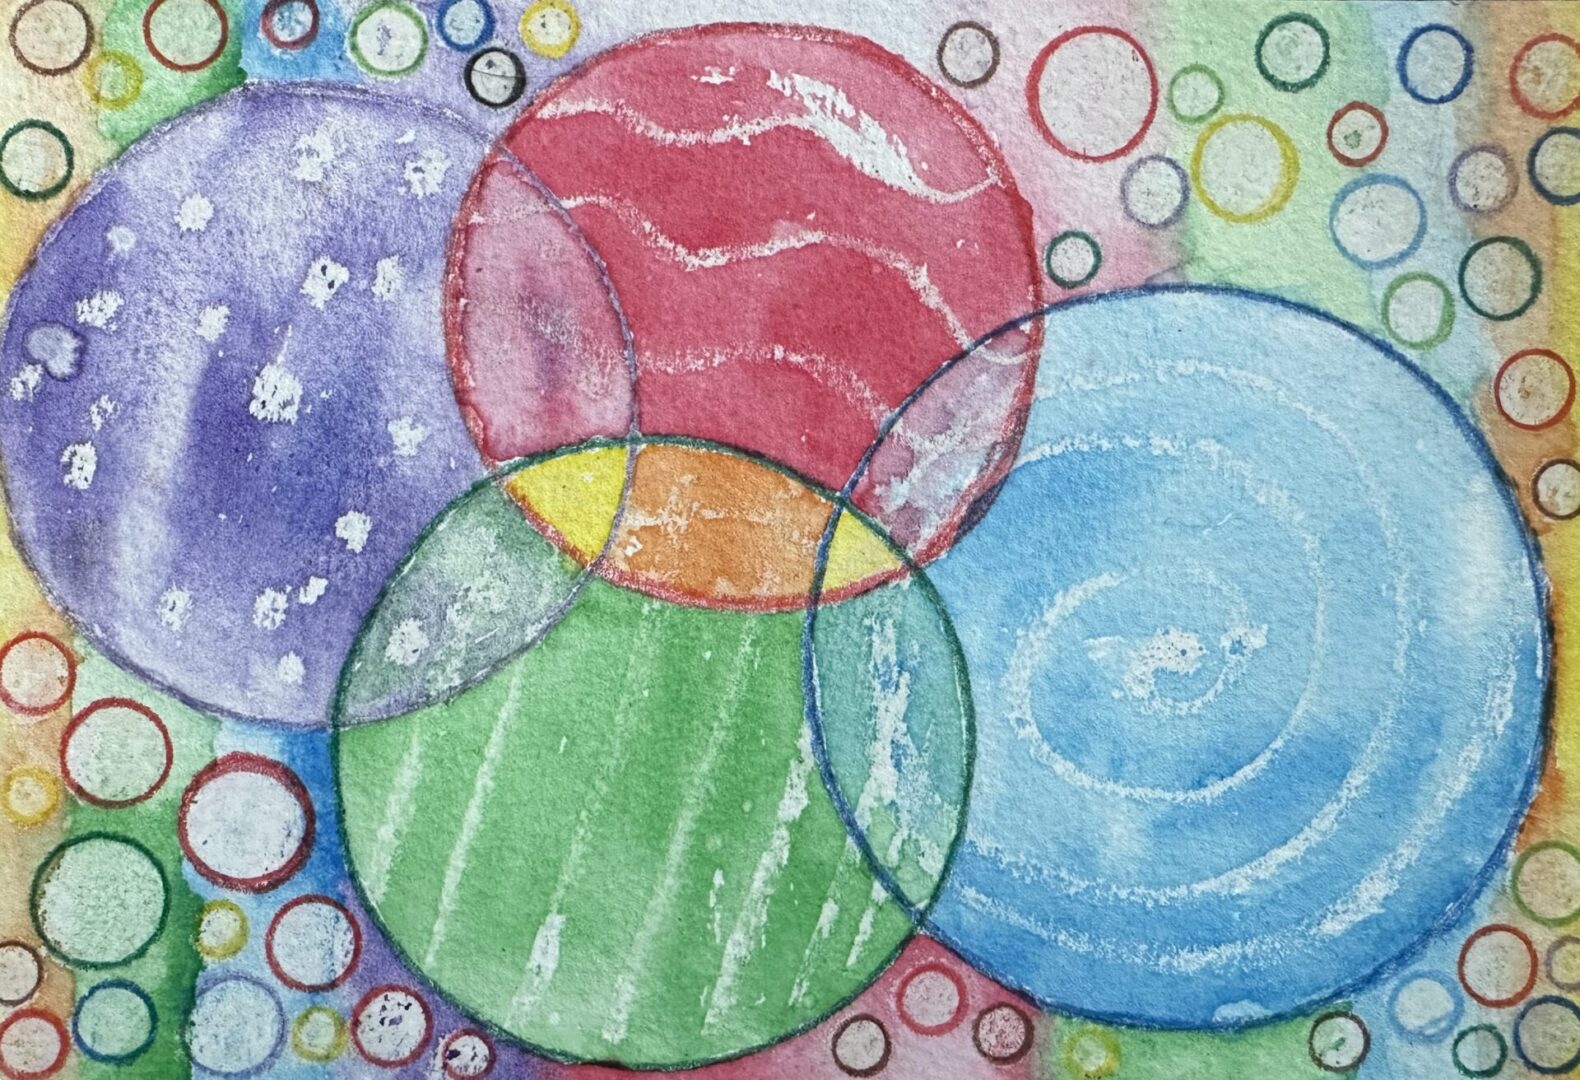 A painting of colorful circles and bubbles on paper.